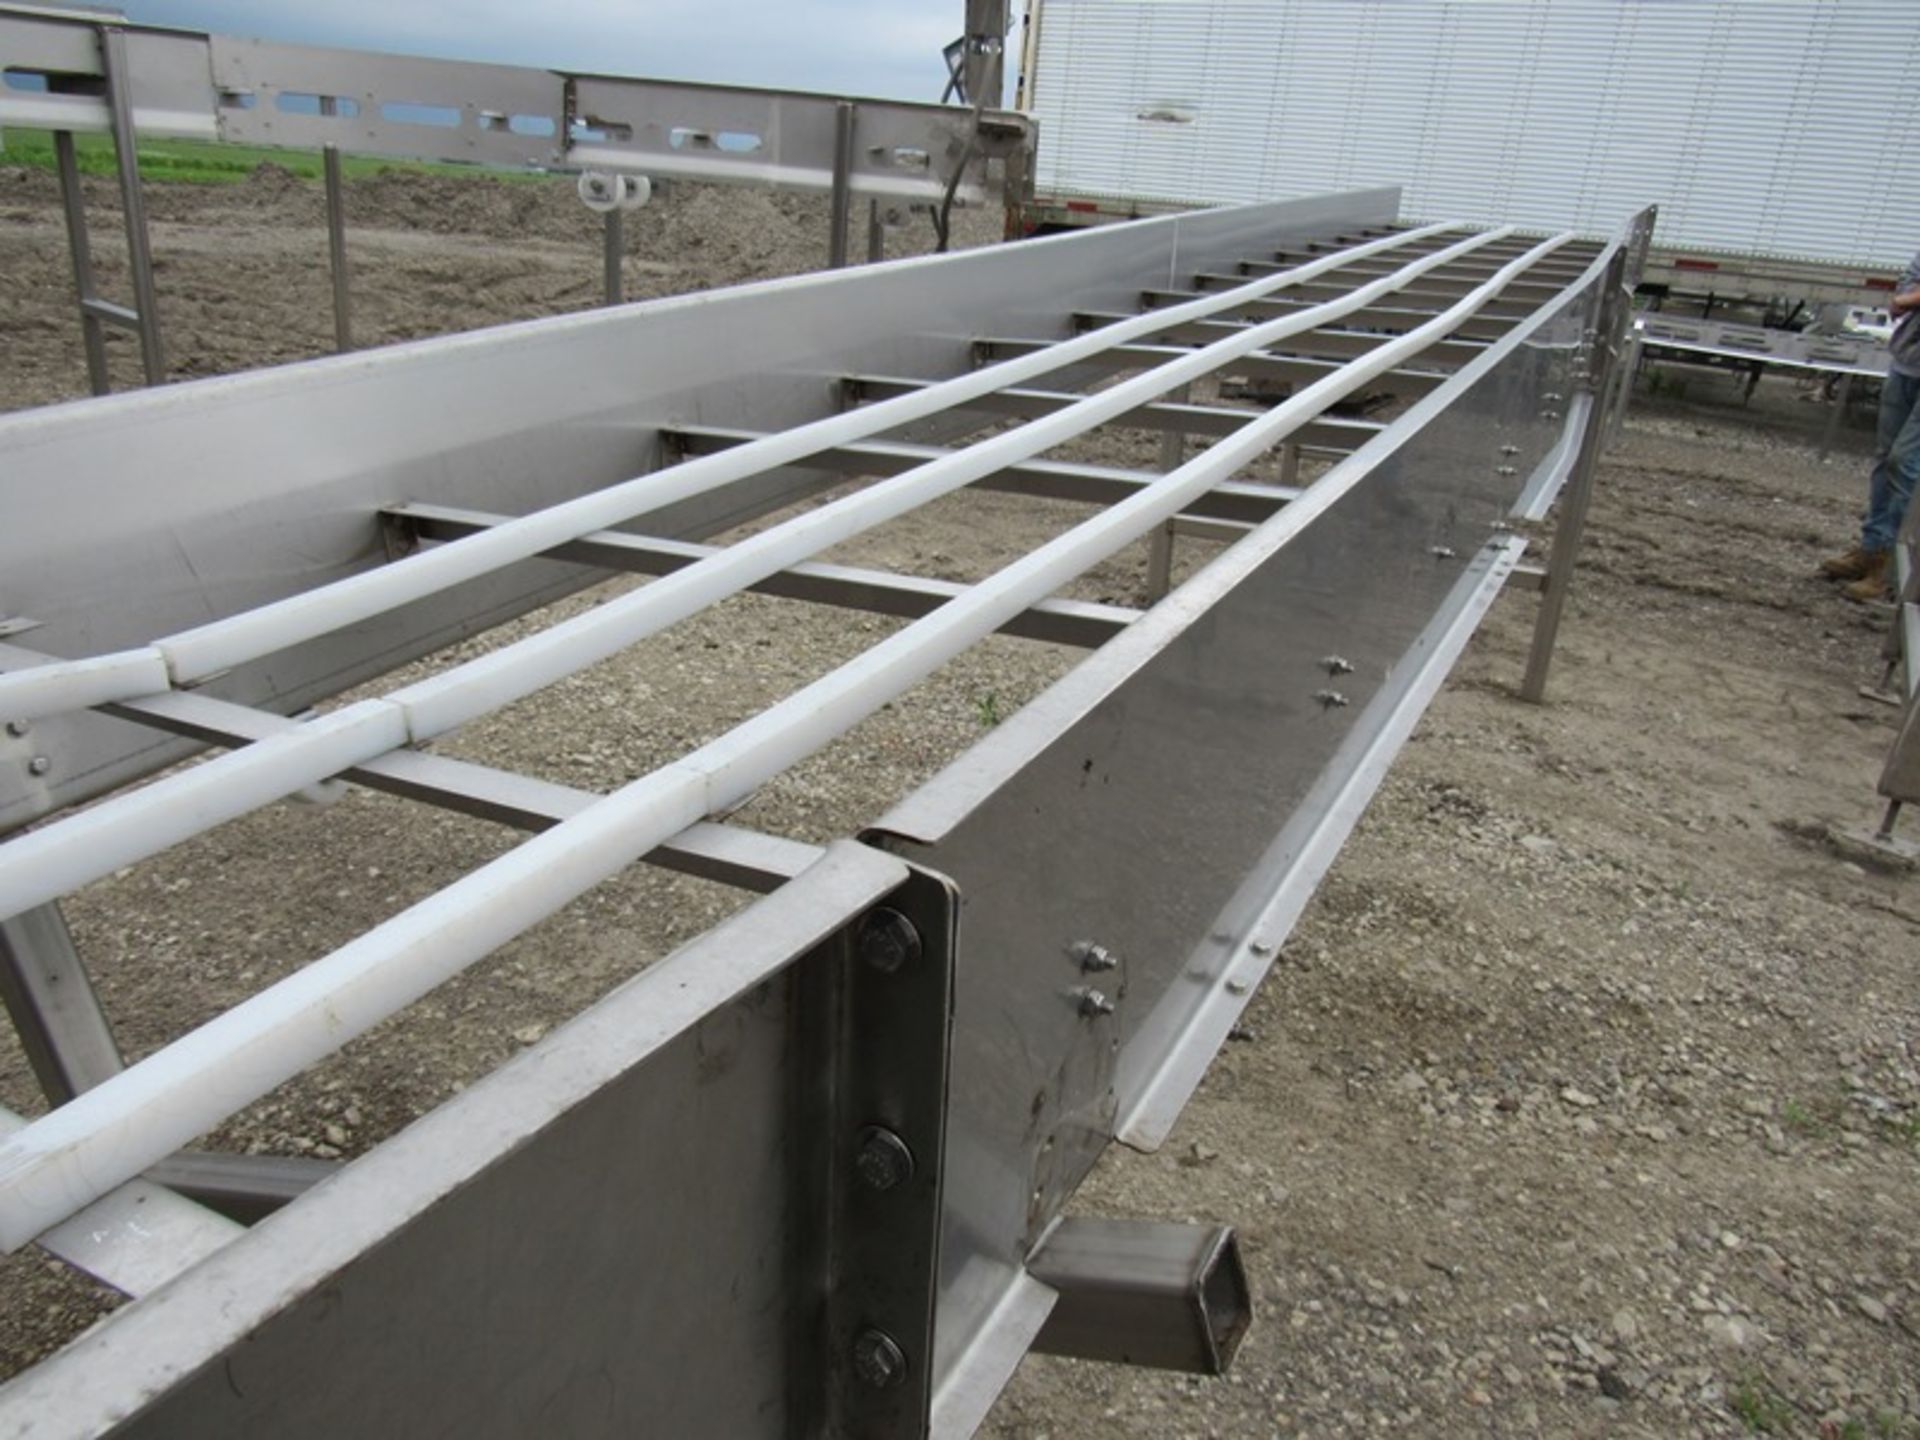 Stainless Steel Conveyor, 3" Wide X 20' Long, no drive (Loading Fee: $150.00 - Rigger: Norm - Image 2 of 2